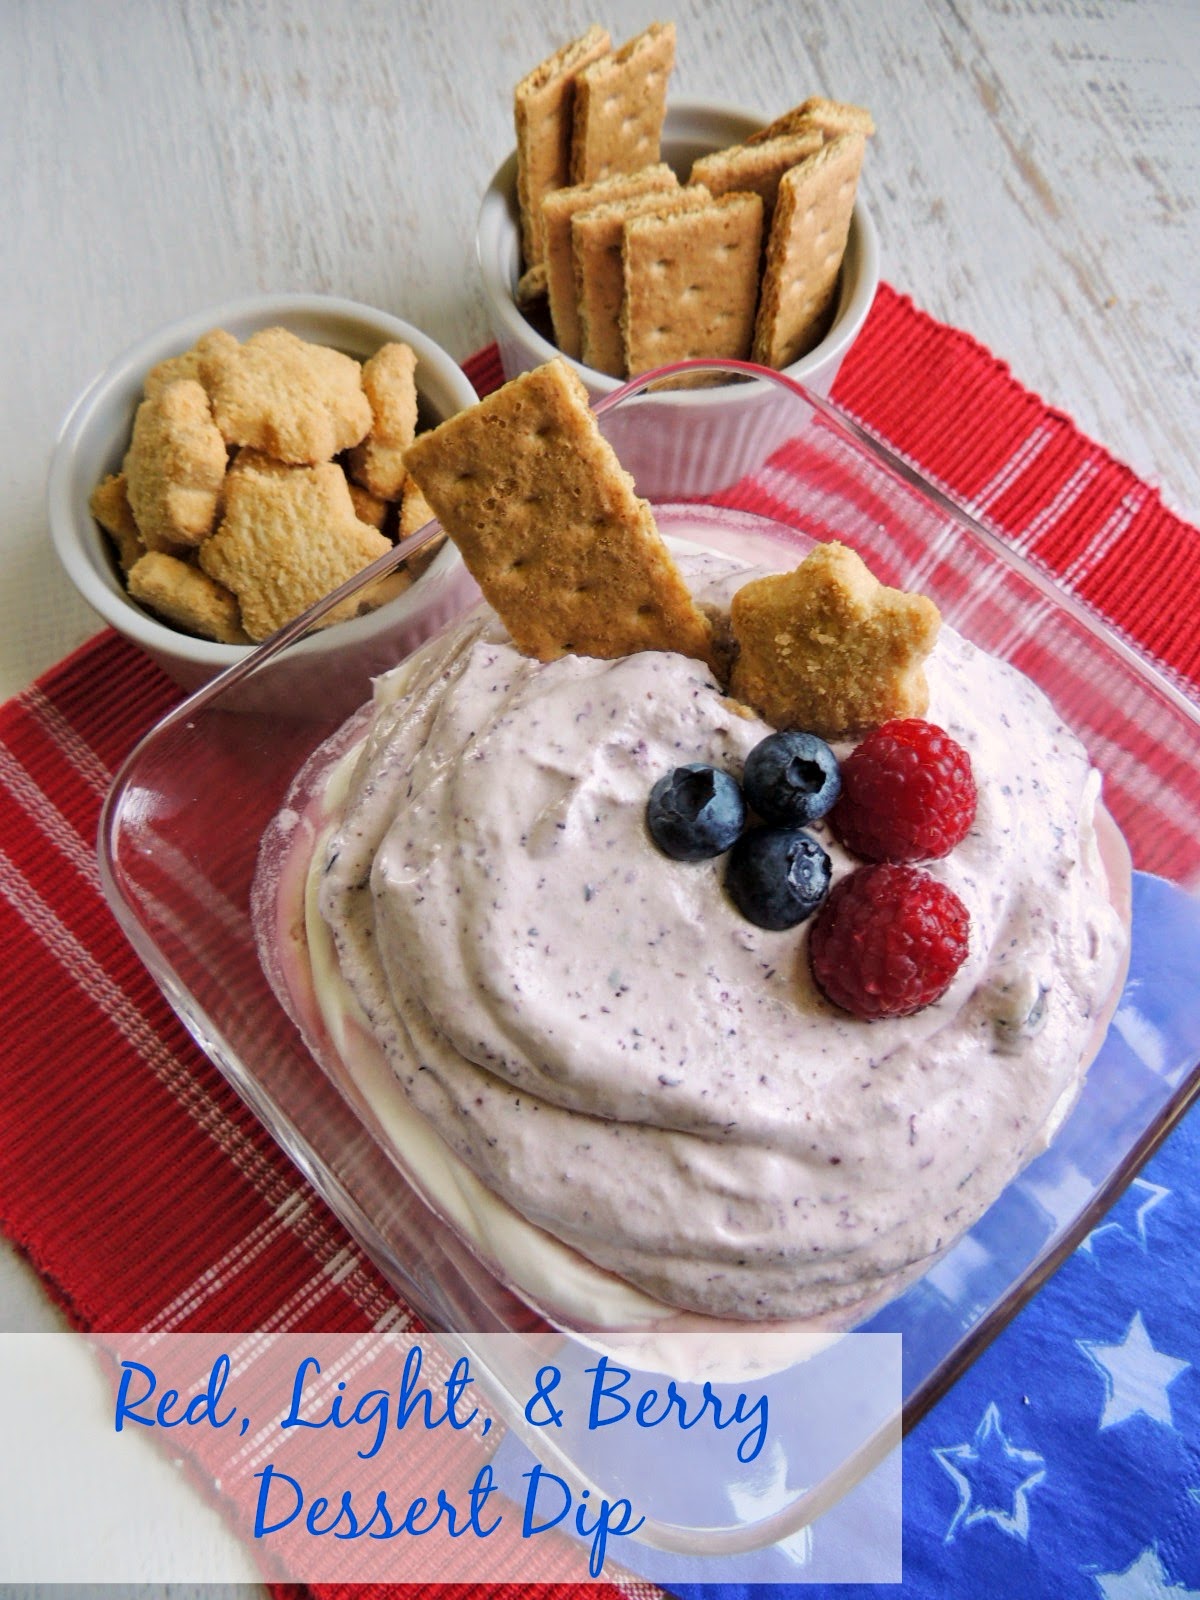 With just 4 simple ingredients, you can make this light & fruity three-layered dessert dip in minutes. And it just happens to have a natural color palette of red, white, & blue- perfect for the Fourth of July.